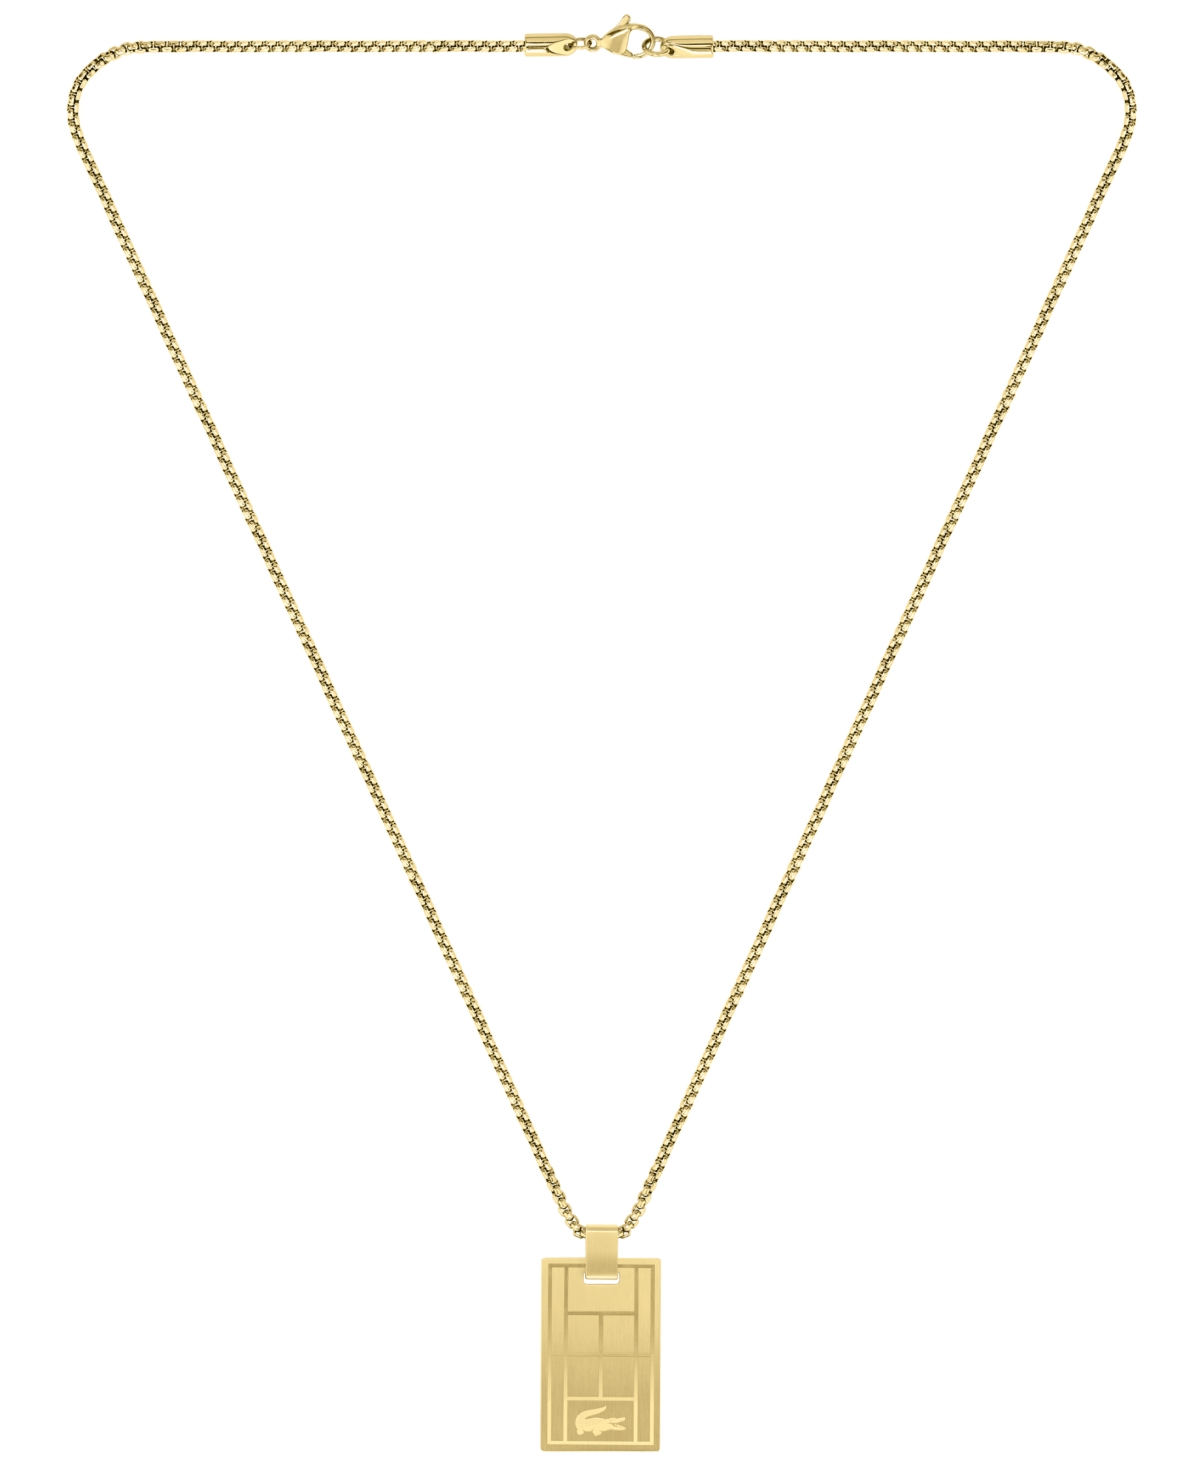 Lacoste Men's Tag Necklace In Gold